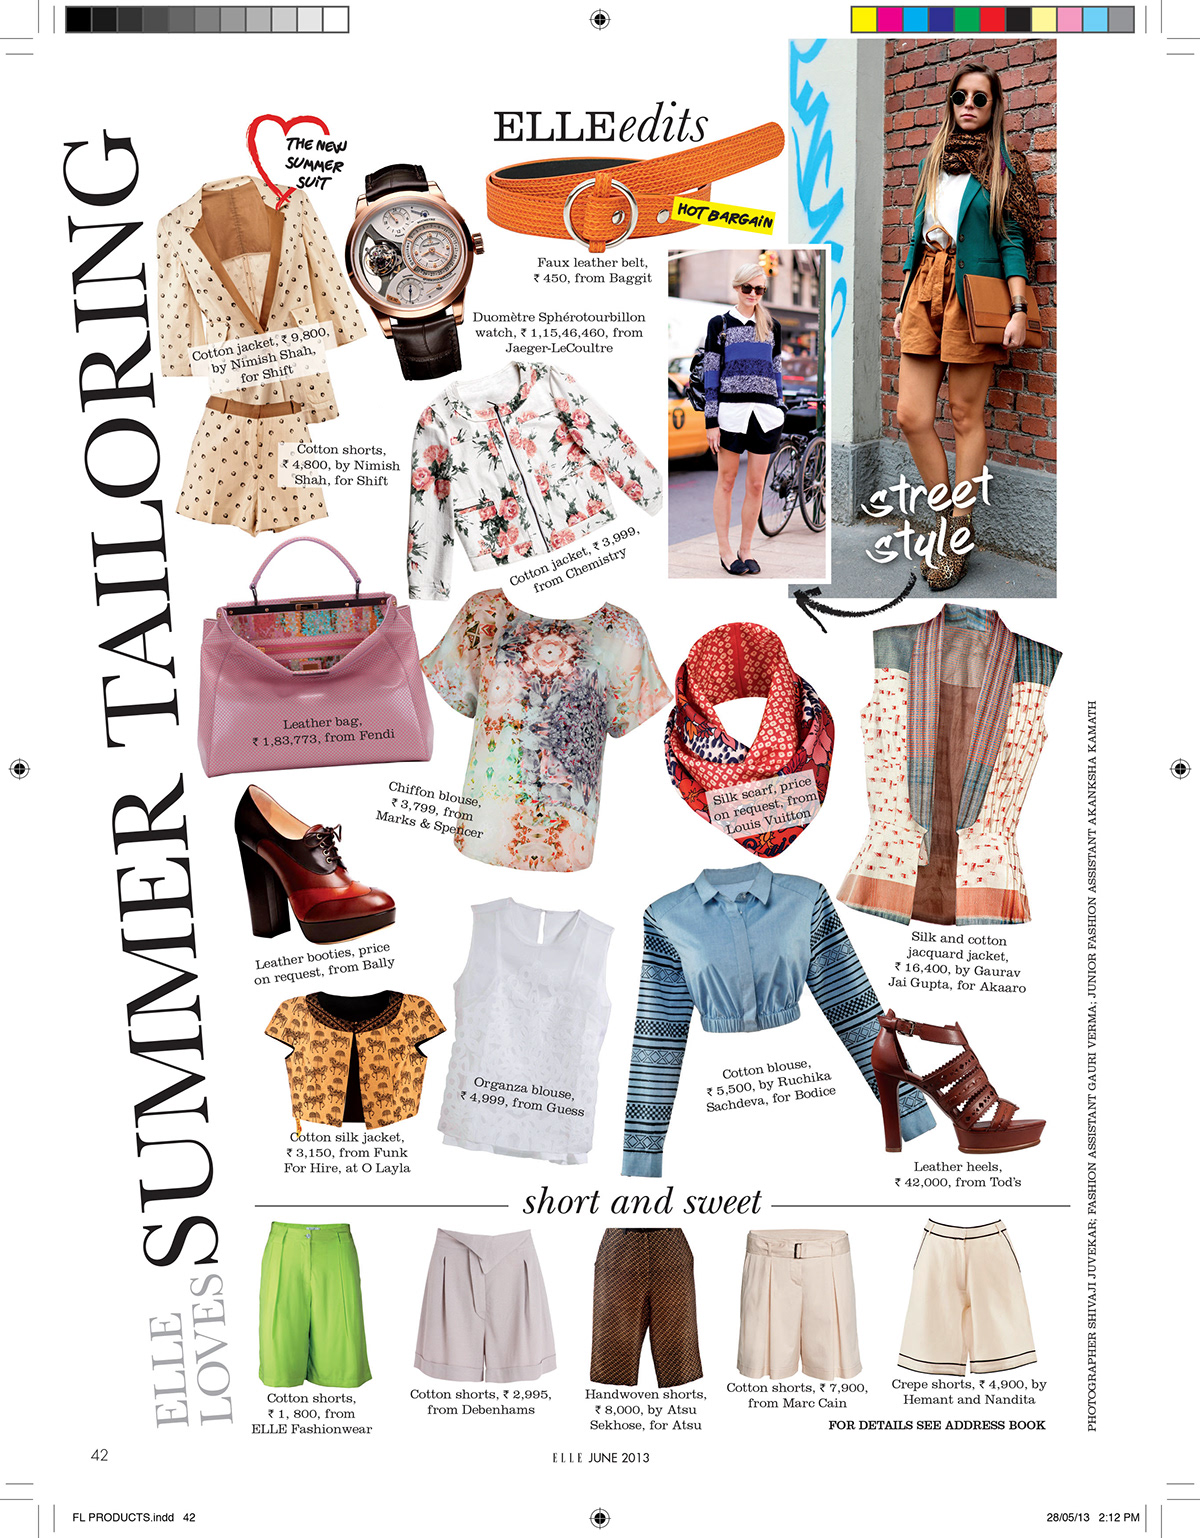 Elle india june 2013 first look Model/Product pages